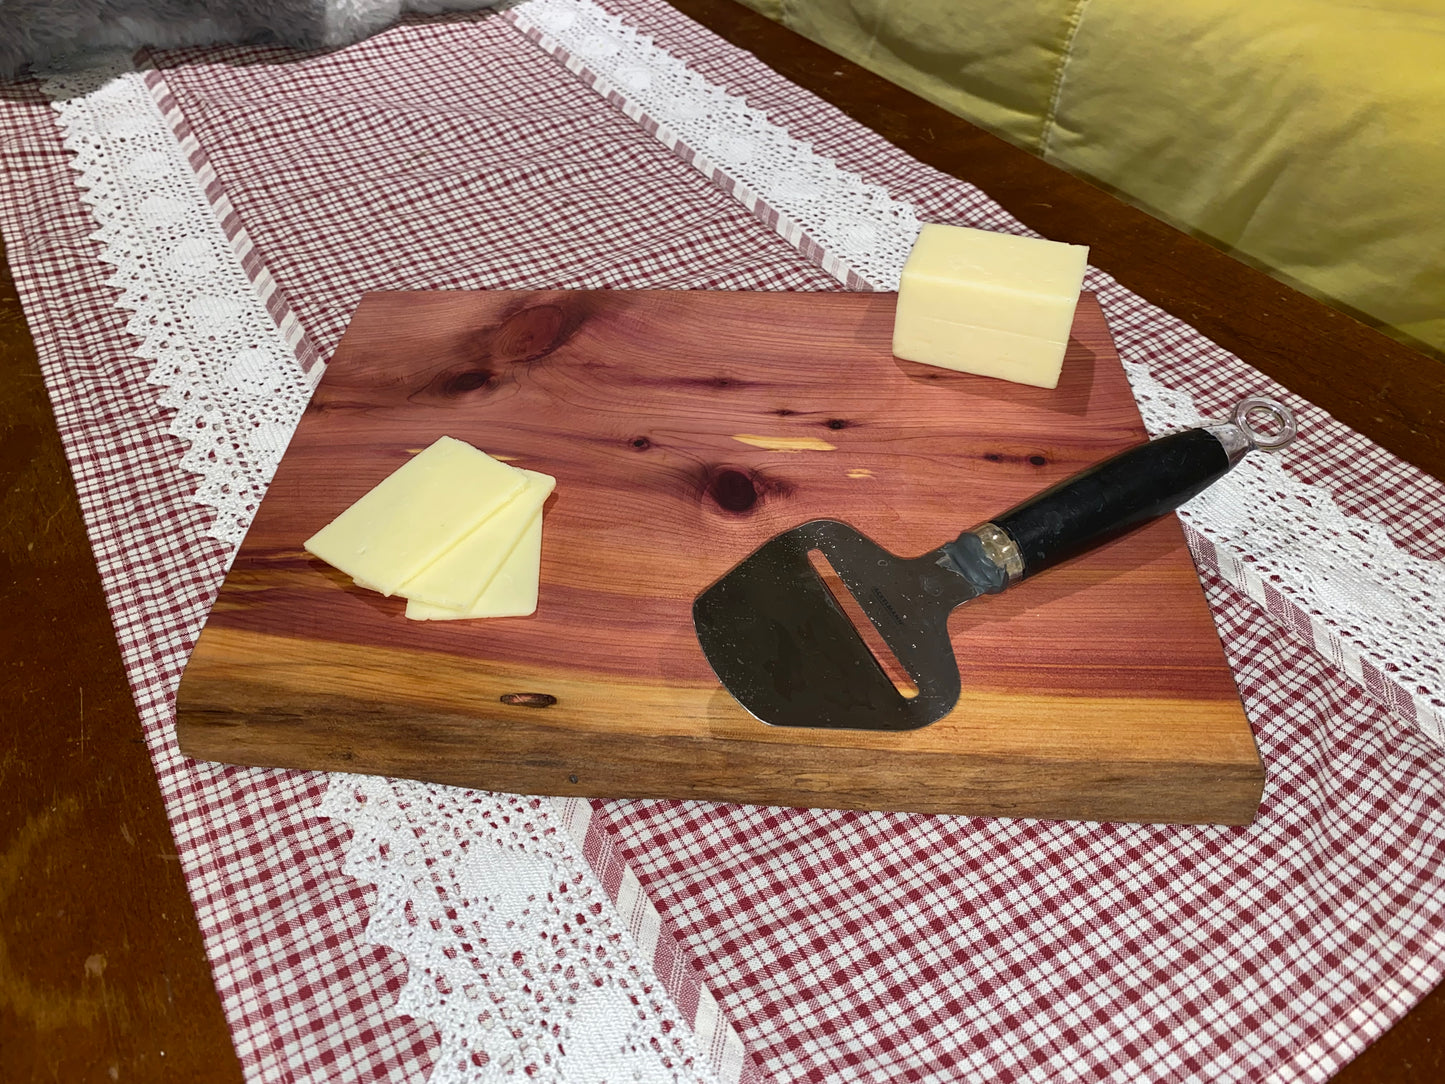 Looking to be the best host among your friend group? Add our new charcuterie boards to your table filled with the best cheeses, meats and fruits. The fresh cedar scent is just a bonus!